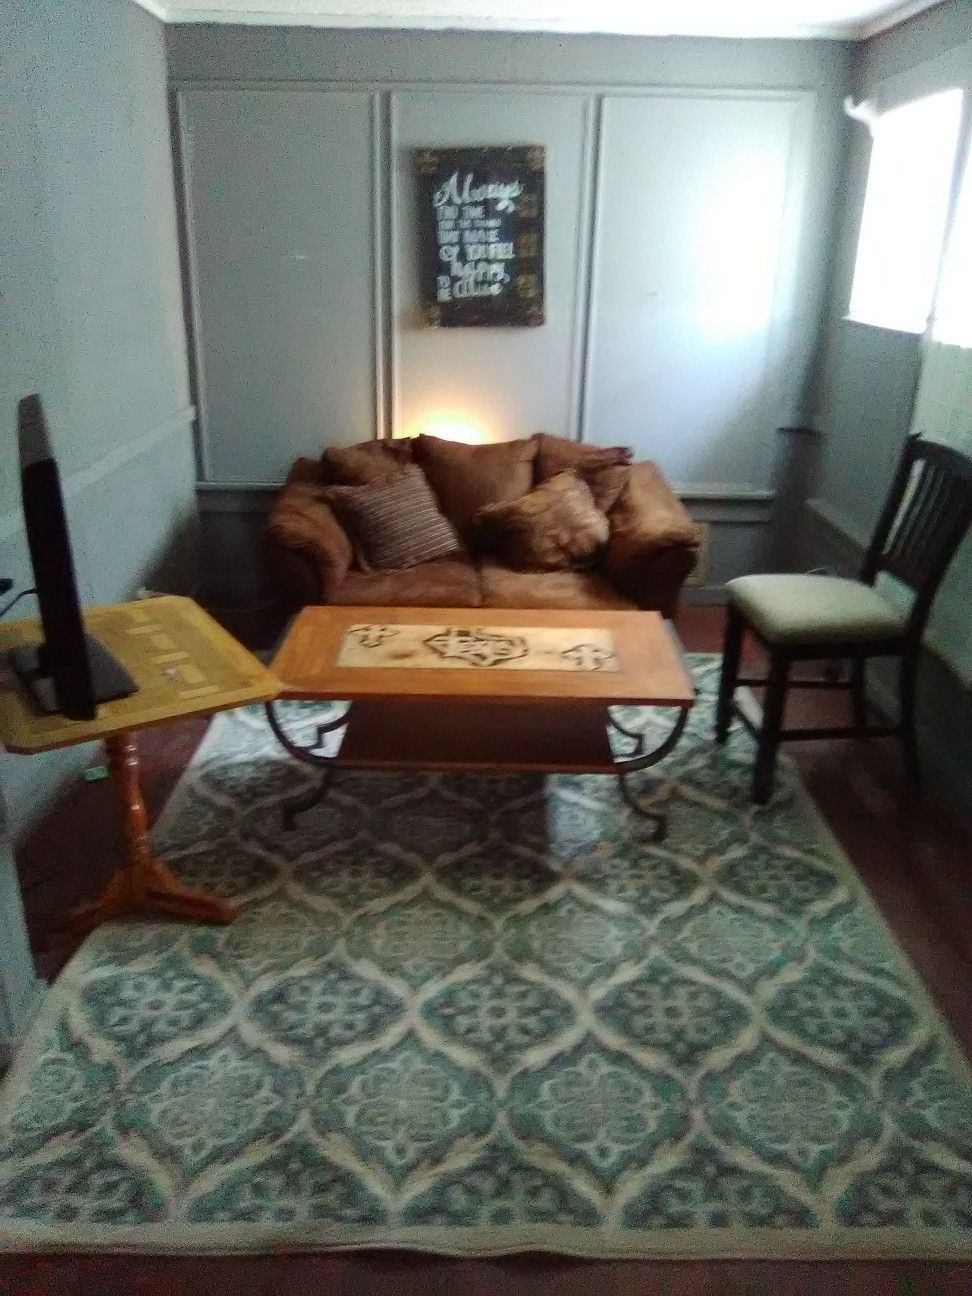 Couch, rug, hand painted signs and coffee table